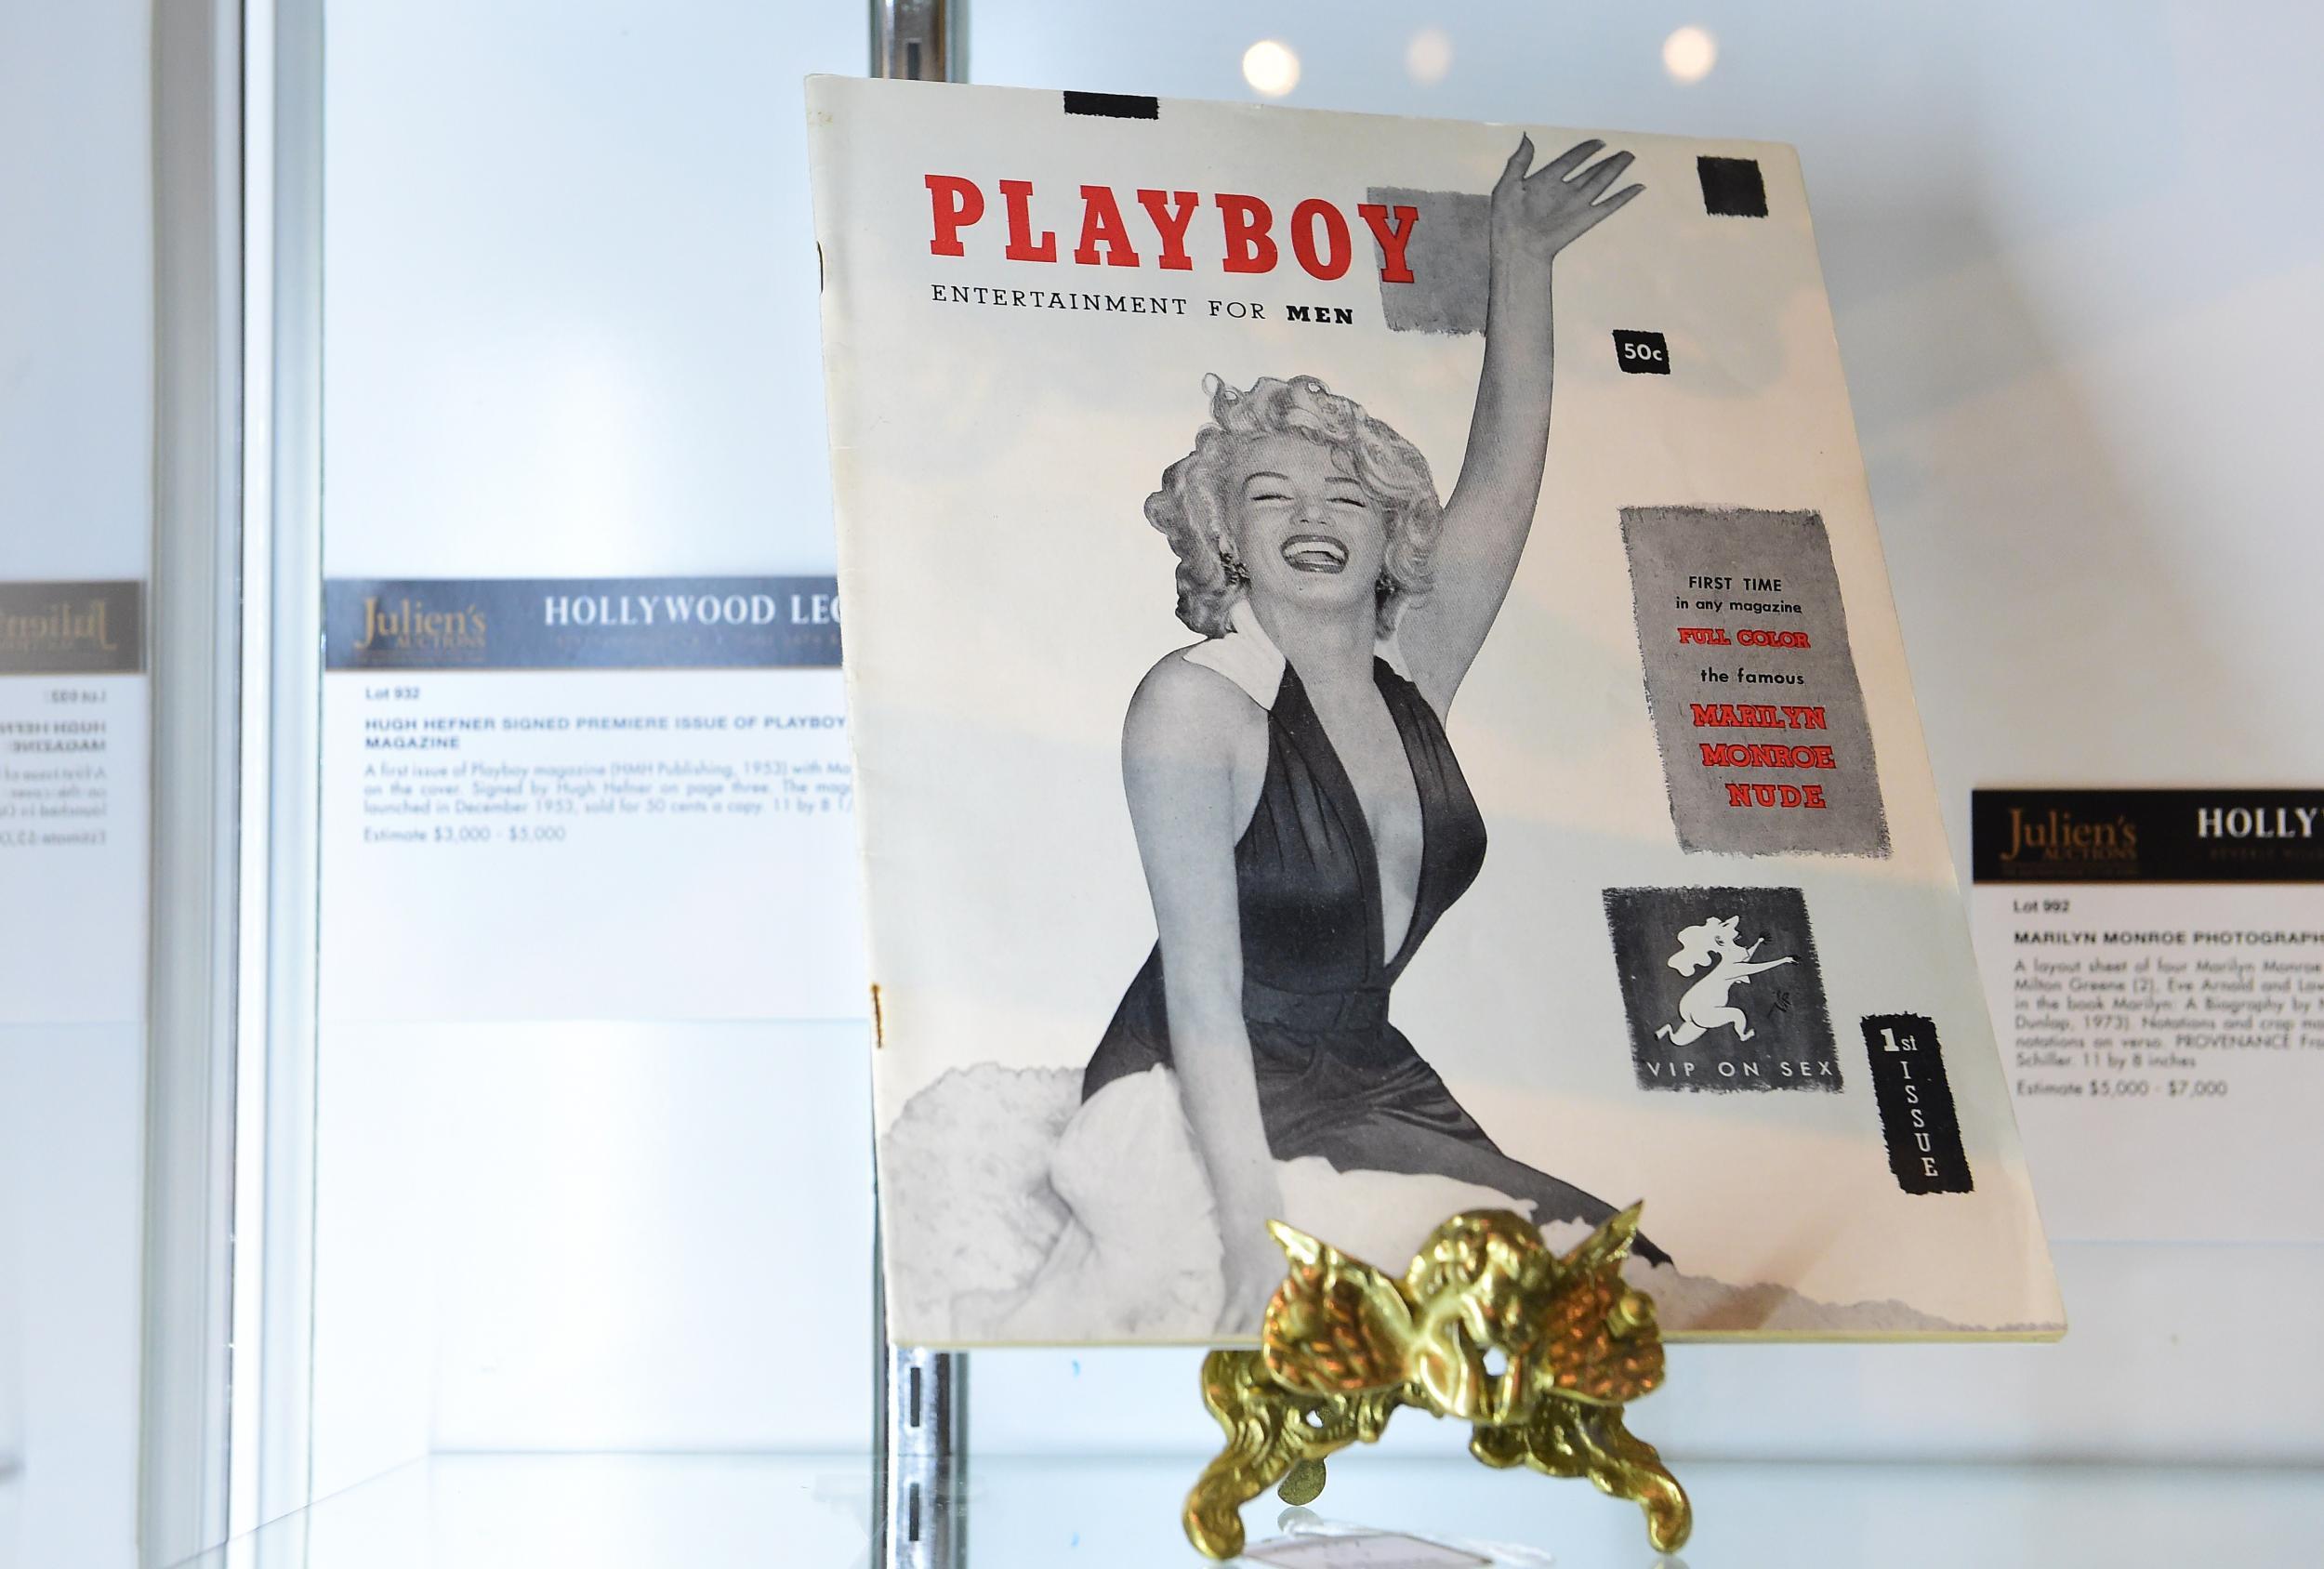 Playboy, one of the most famous brands in the world, is famed for its centrefolds of nude and semi-nude models